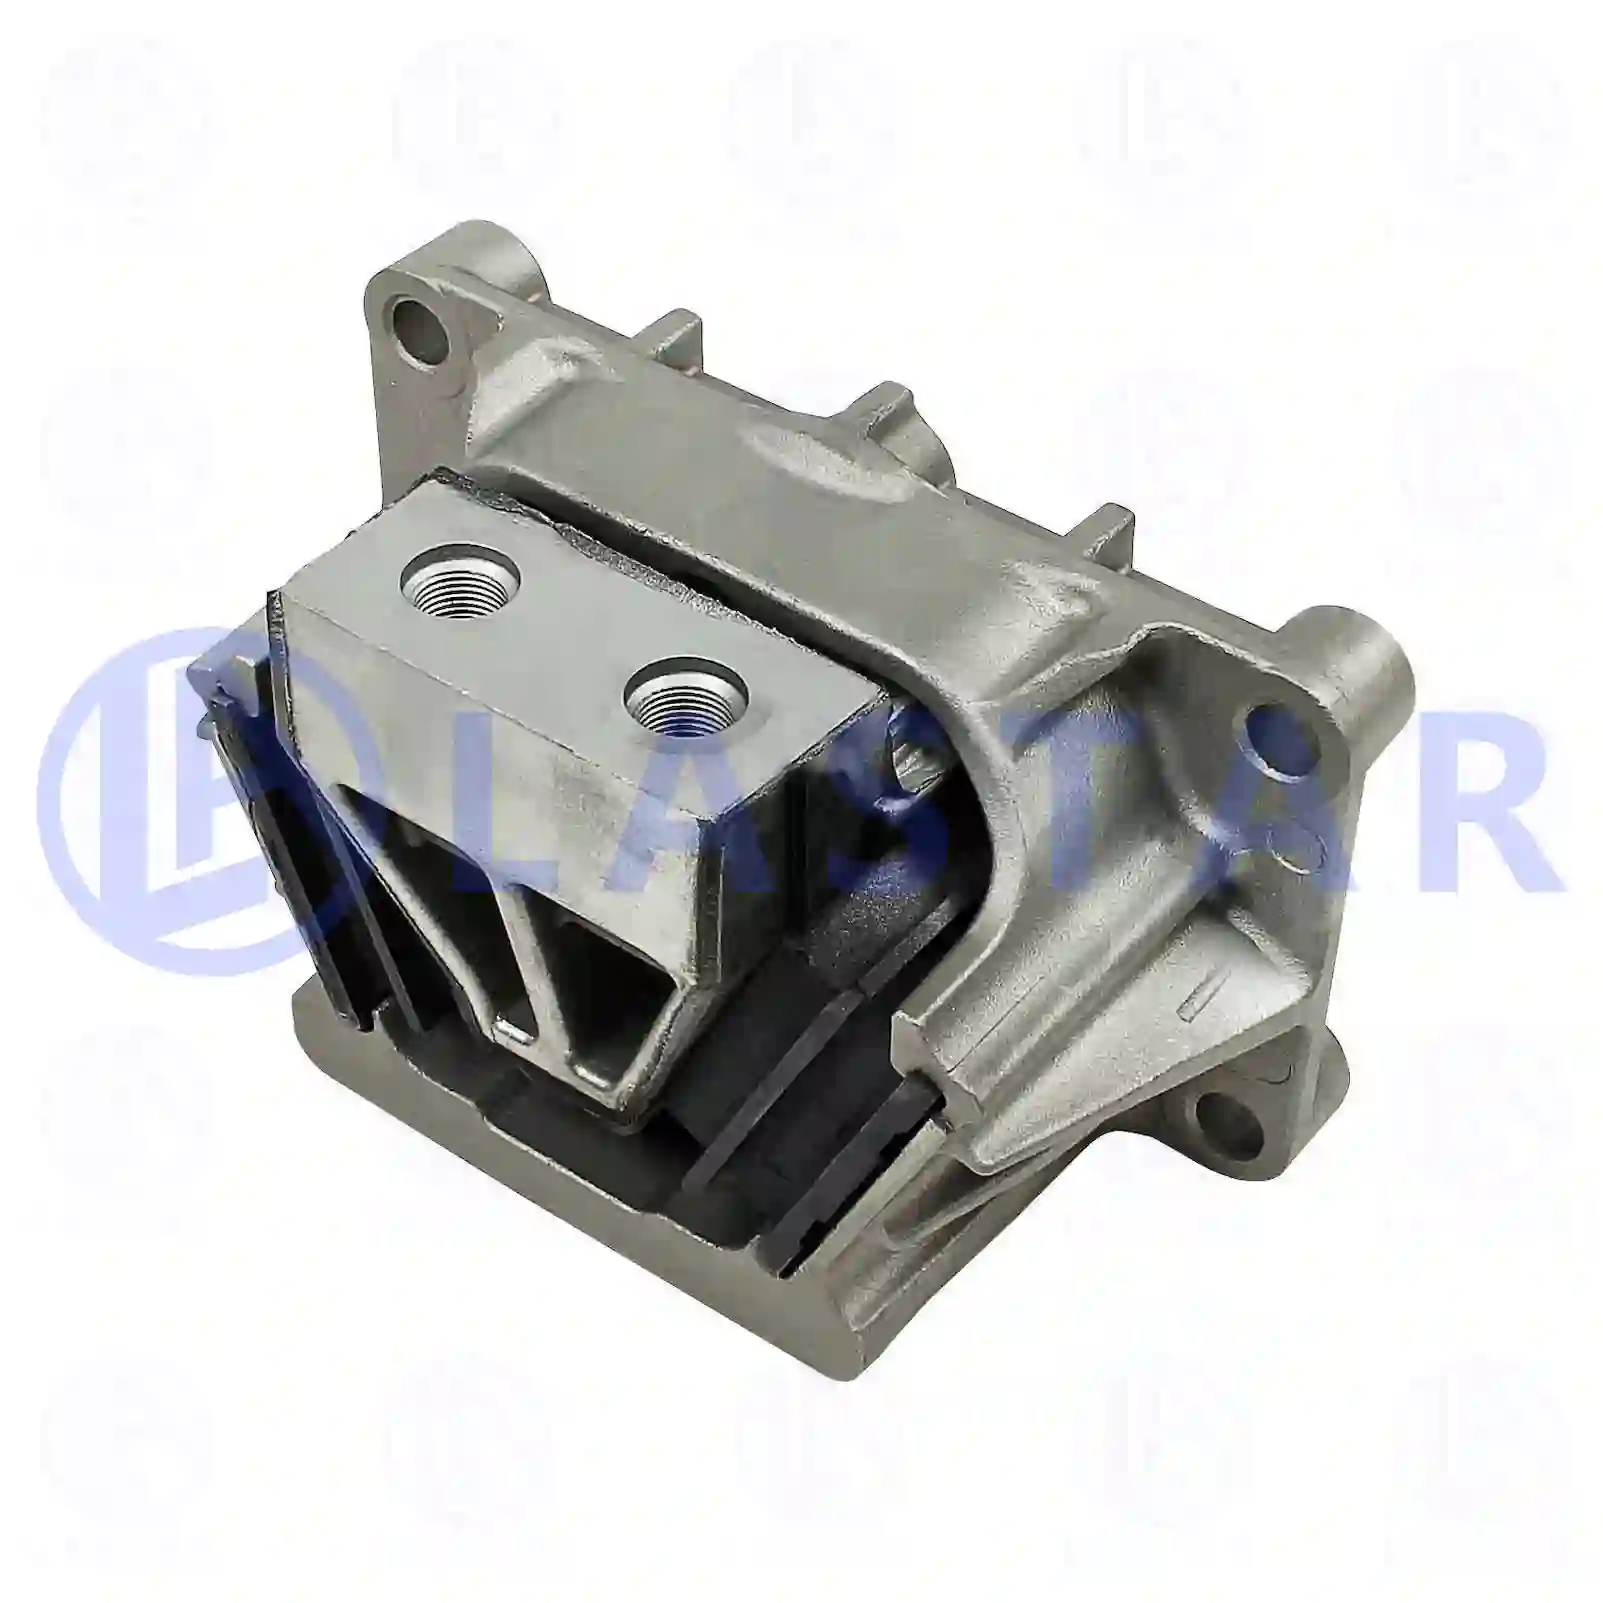 Engine mounting, 77702399, 9412415413, 9412417413, , , ||  77702399 Lastar Spare Part | Truck Spare Parts, Auotomotive Spare Parts Engine mounting, 77702399, 9412415413, 9412417413, , , ||  77702399 Lastar Spare Part | Truck Spare Parts, Auotomotive Spare Parts